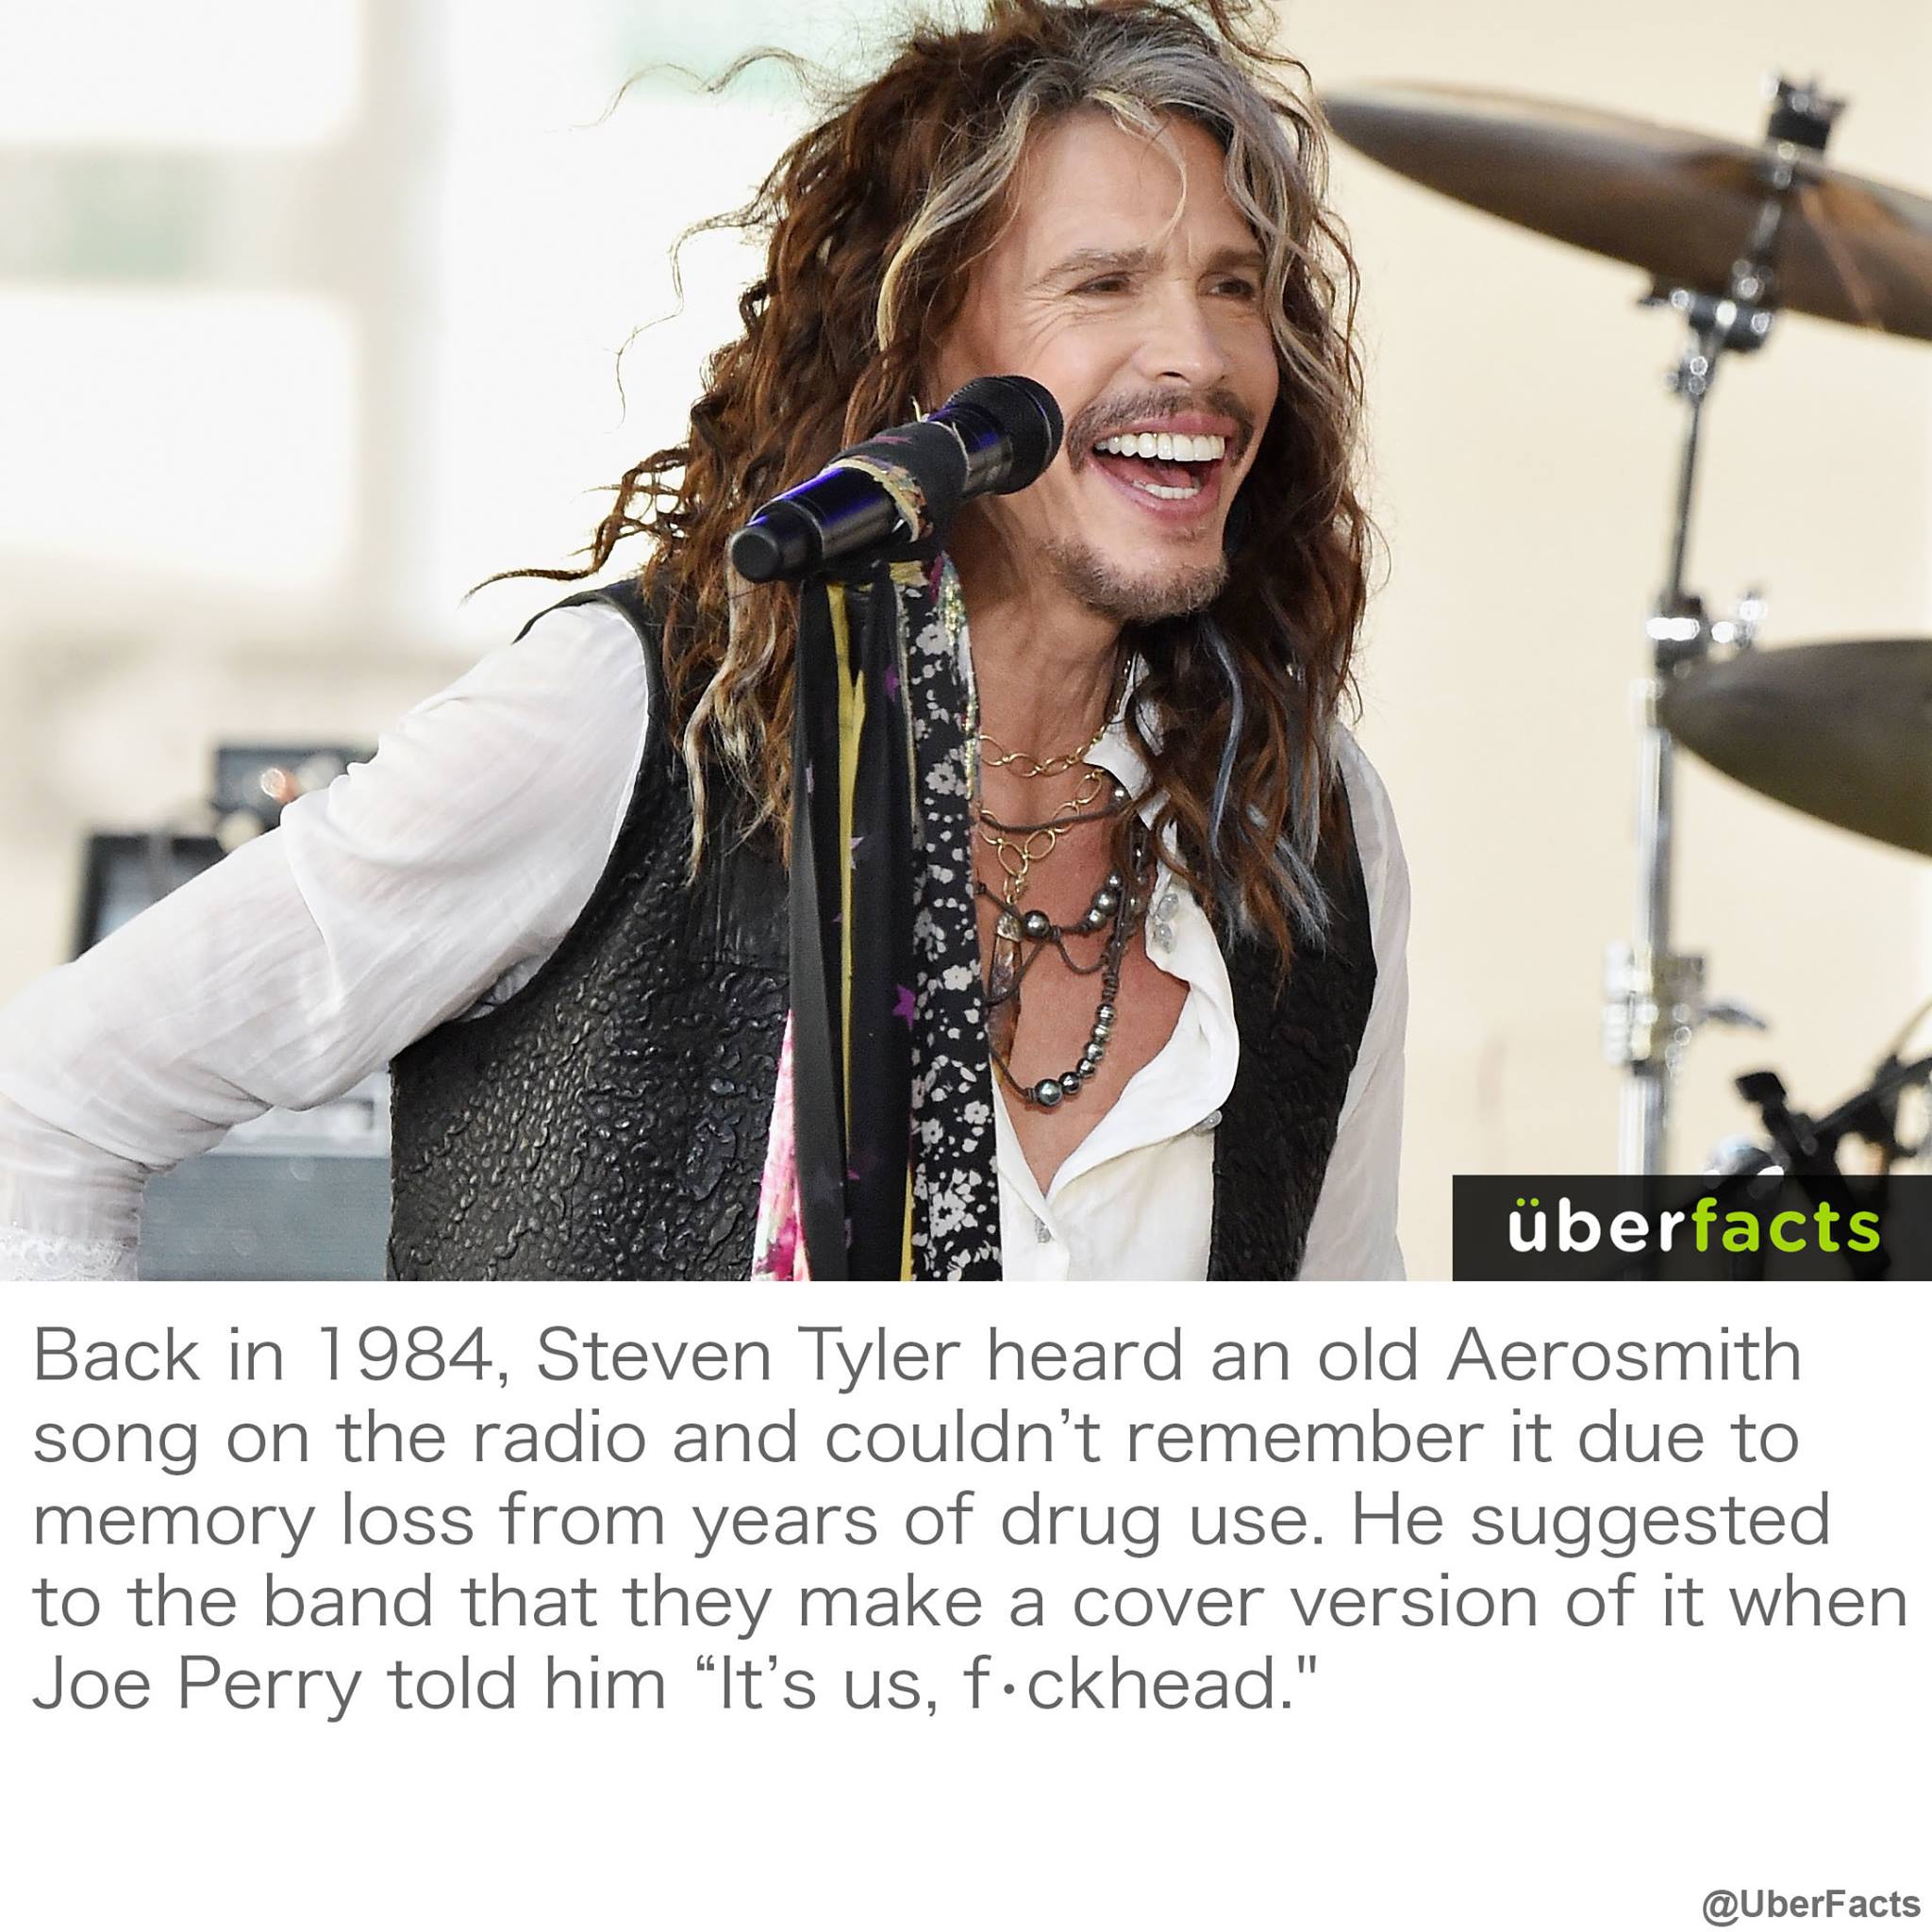 back in 1984 steven tyler heard an old aerosmith song on the radio and couldn't remember it die to memory loss from years of drug use, he suggested to the band that they make a cover of it when joe perry told him, it's us fuckhead